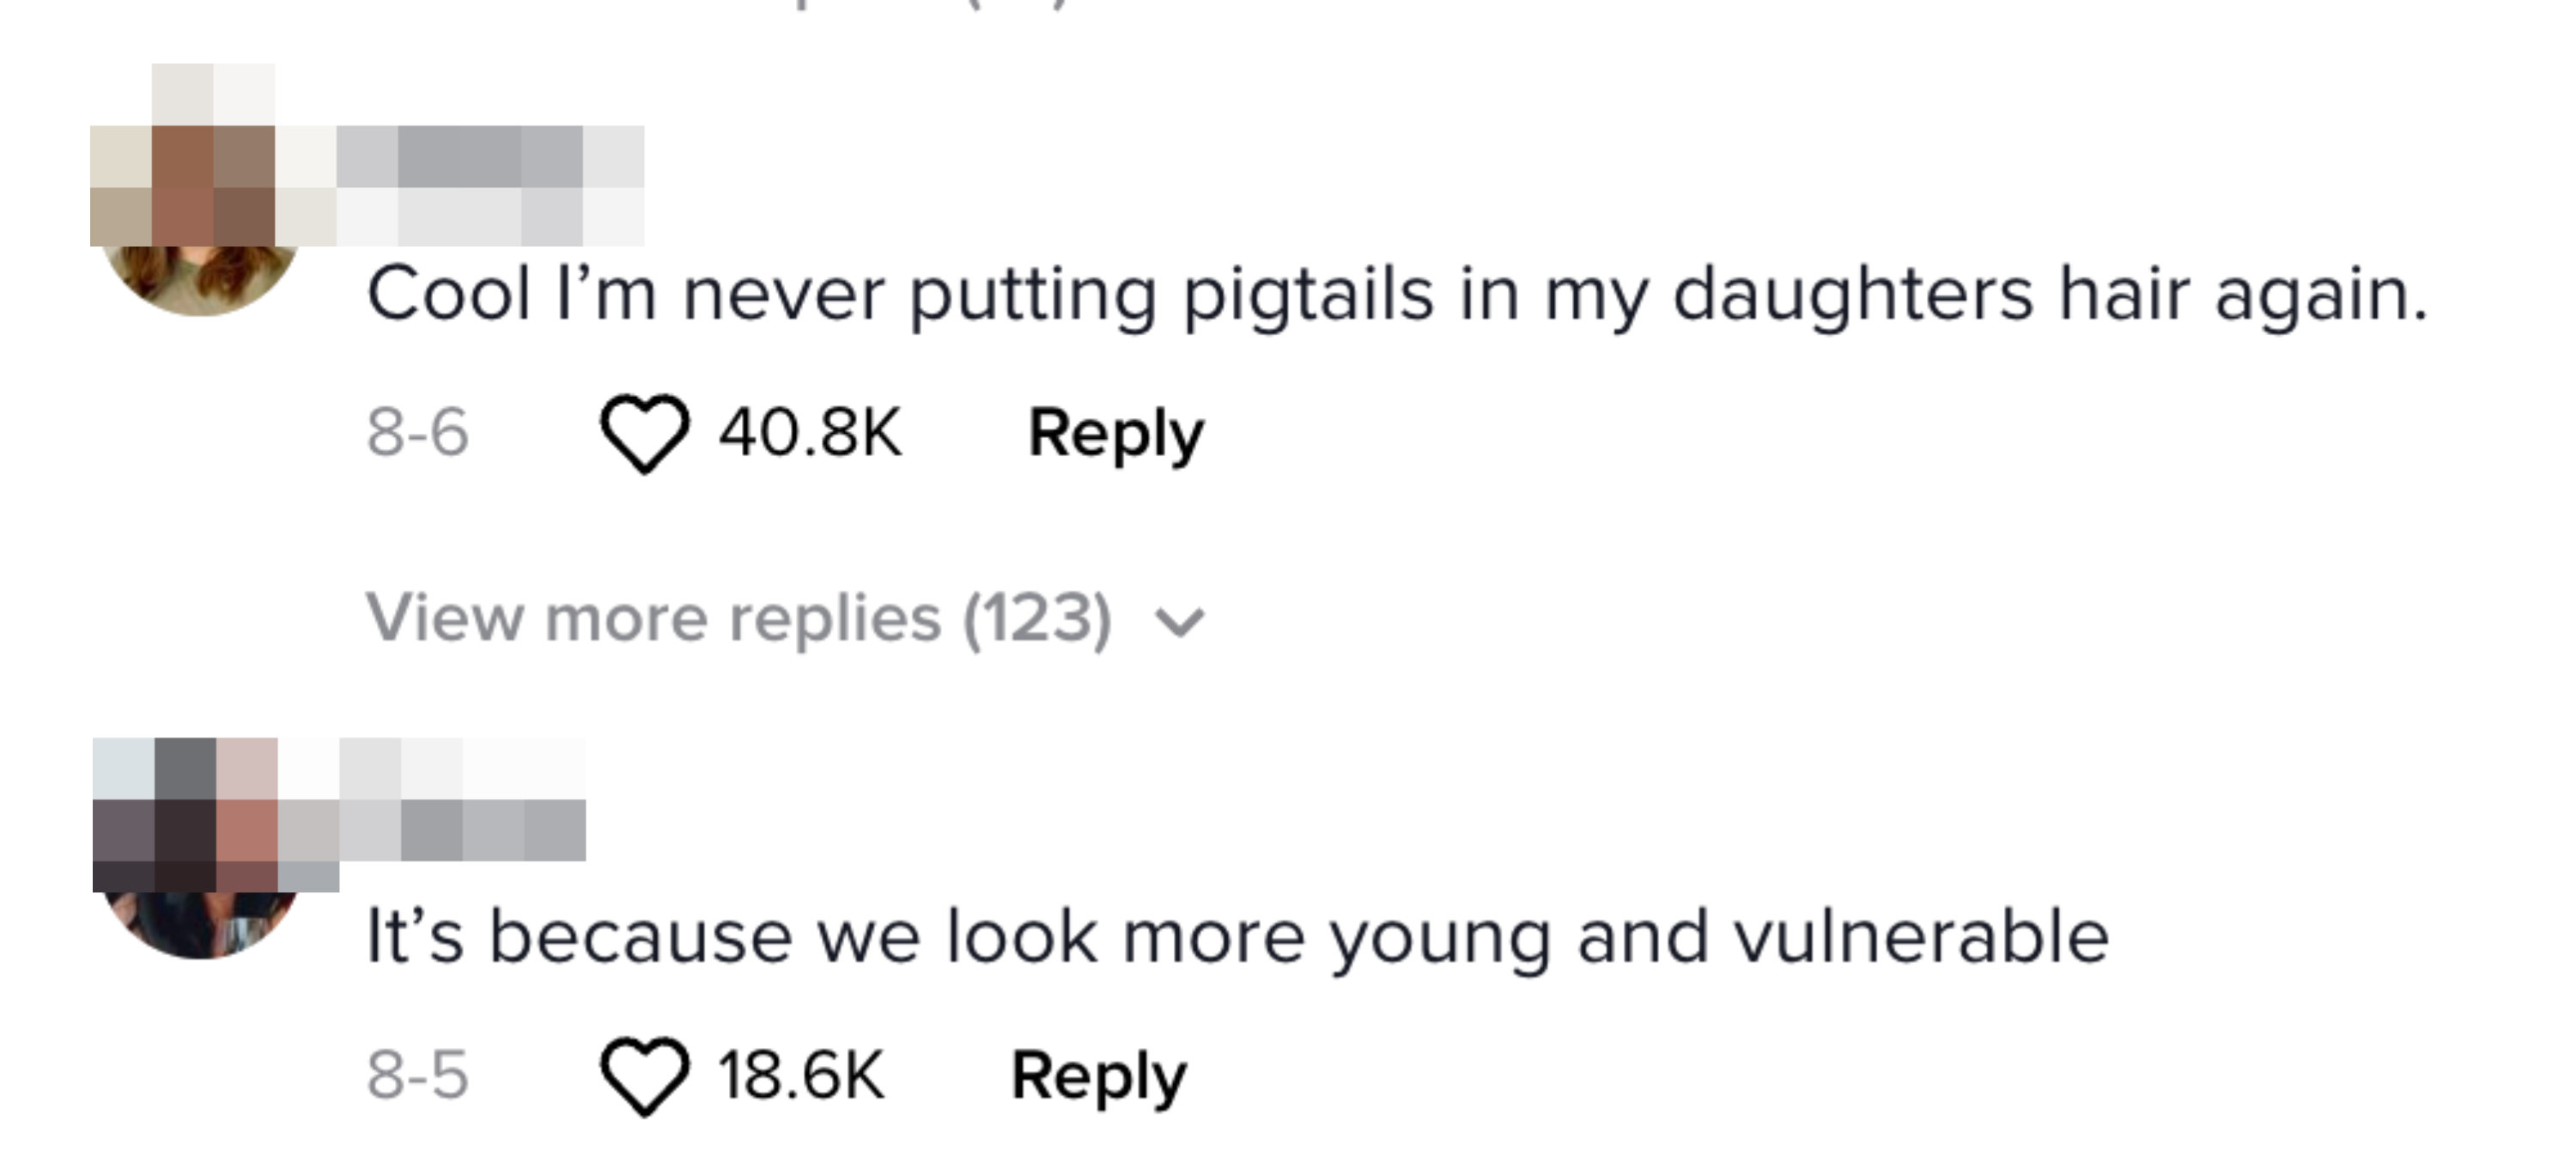 One comment says this happens because women look younger and more vulnerable, while another says they&#x27;re never putting pigtails on their daughters again